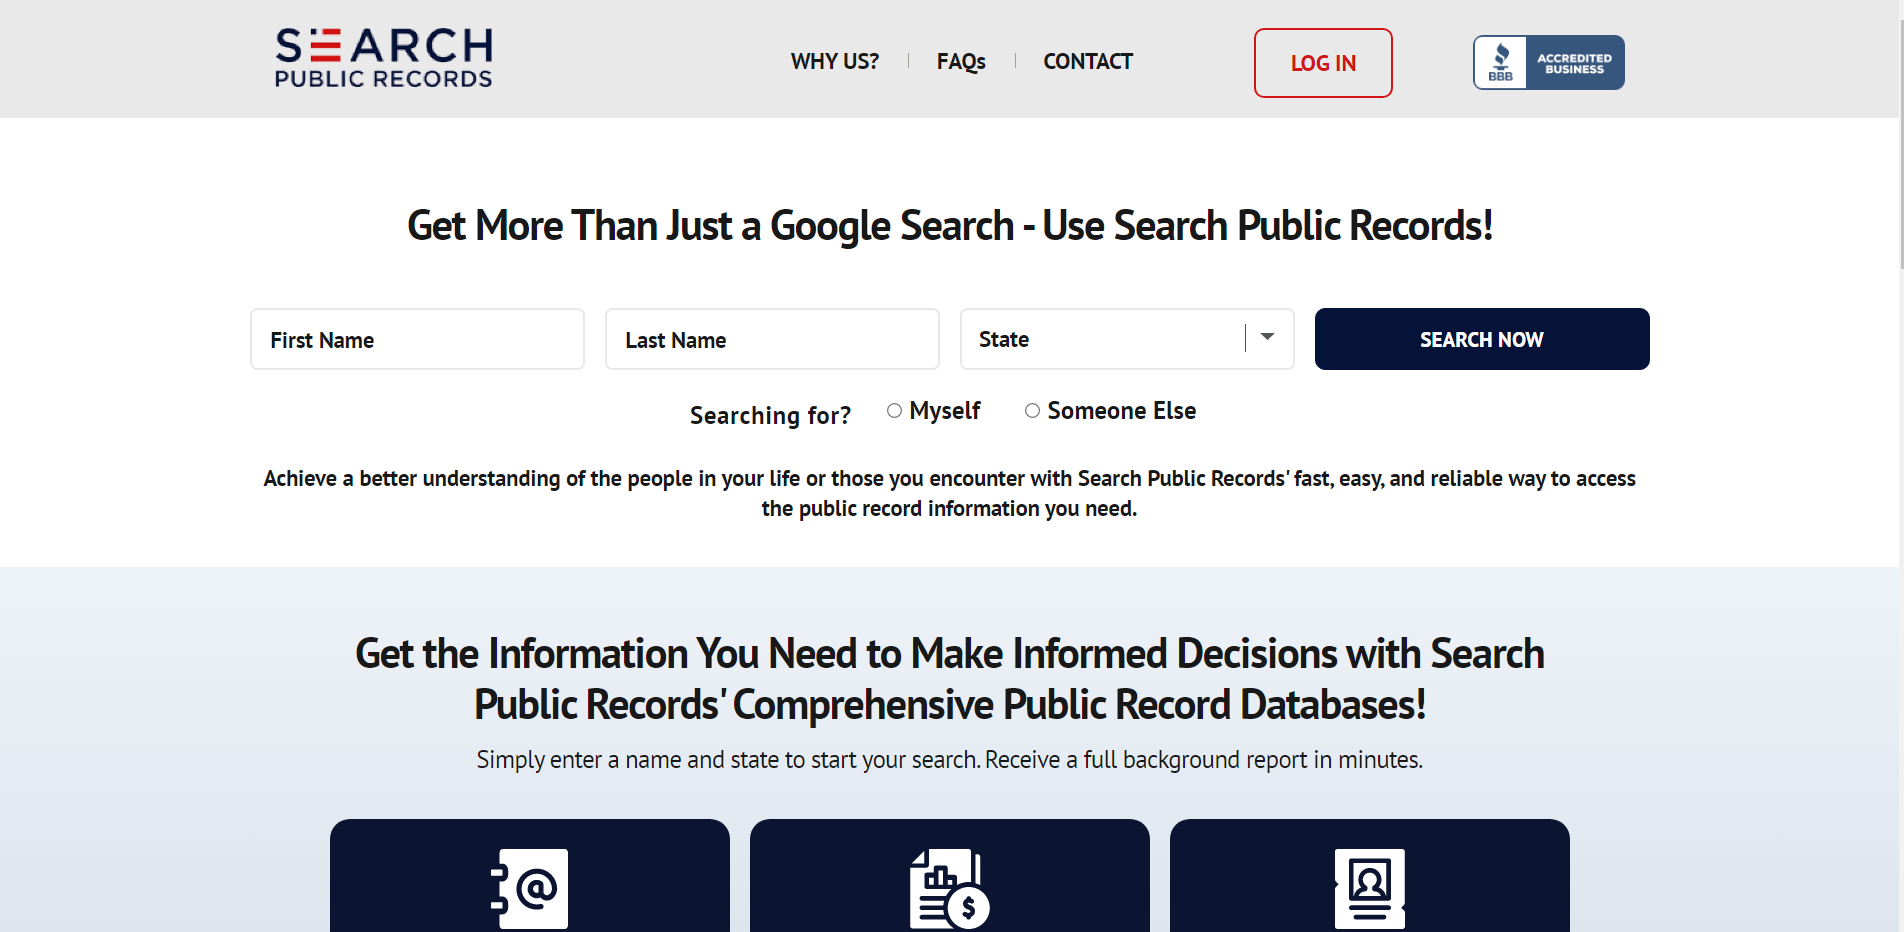 how to cancel search public records subscription